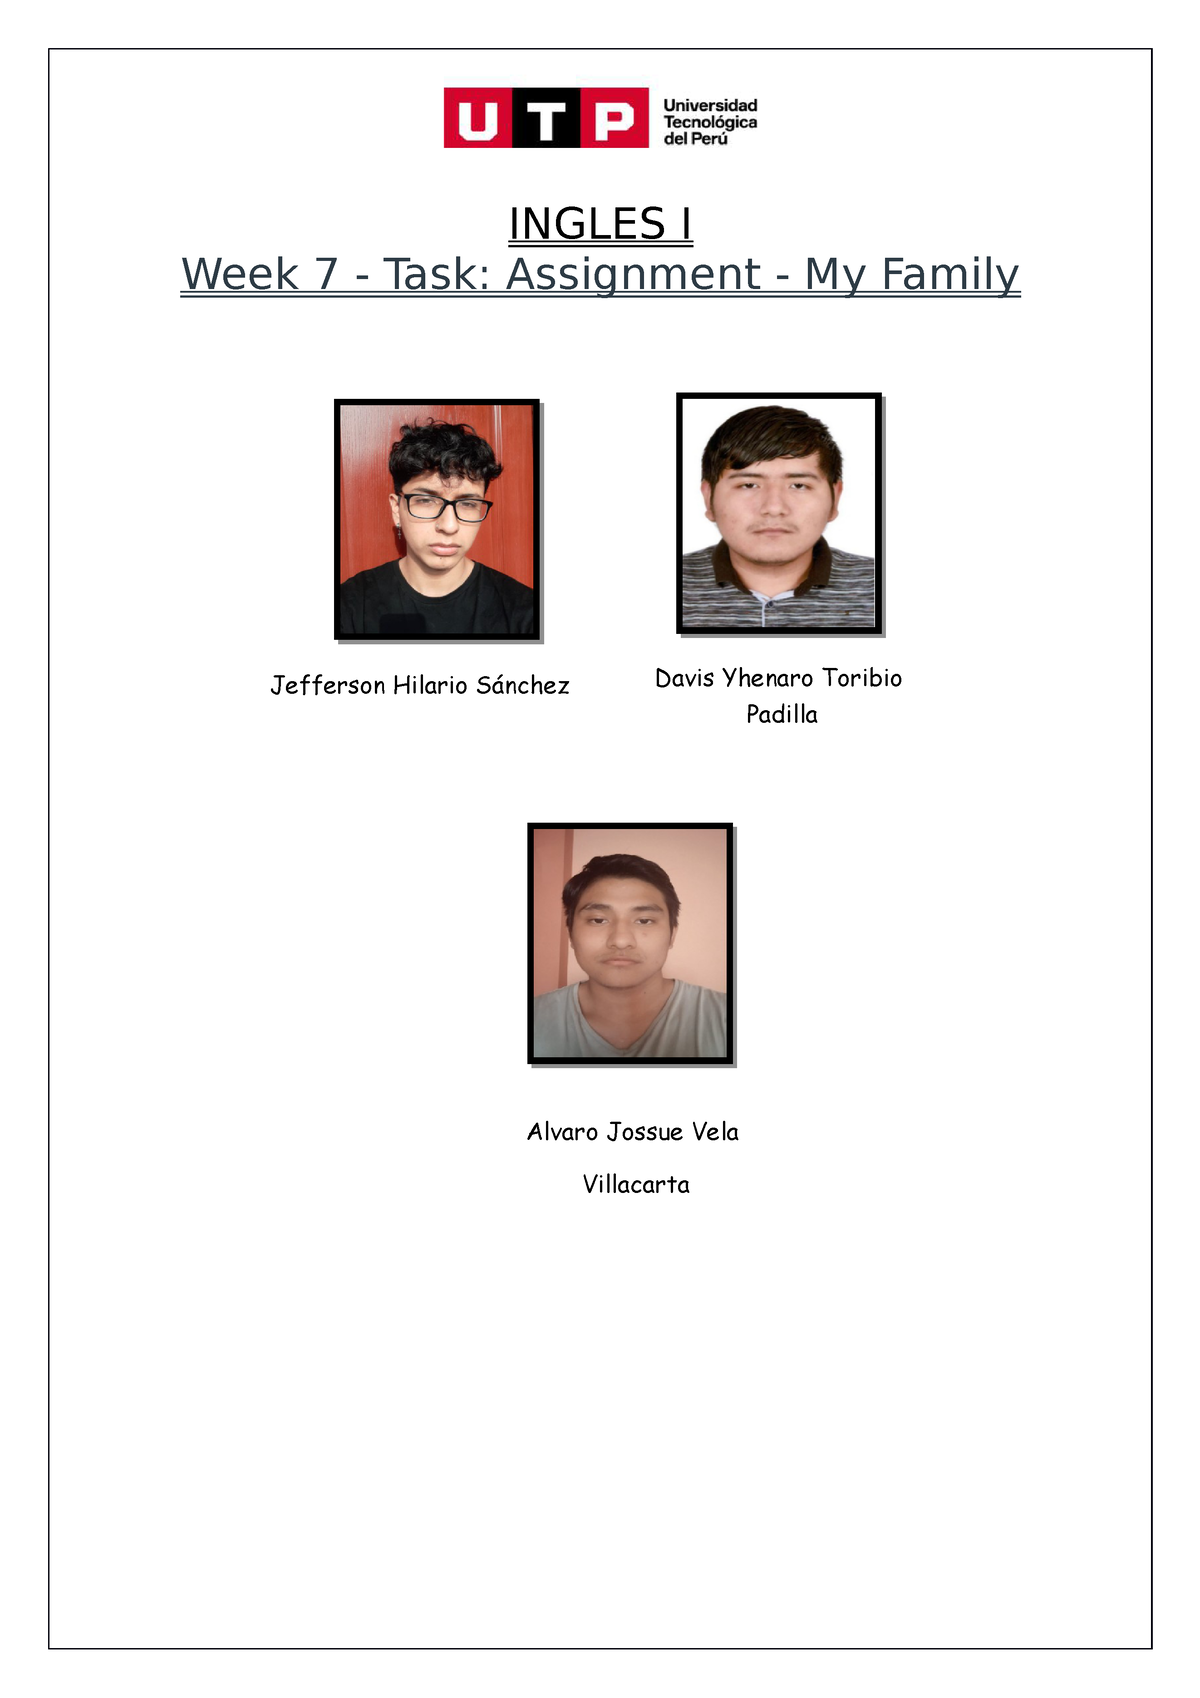 task assignment my family